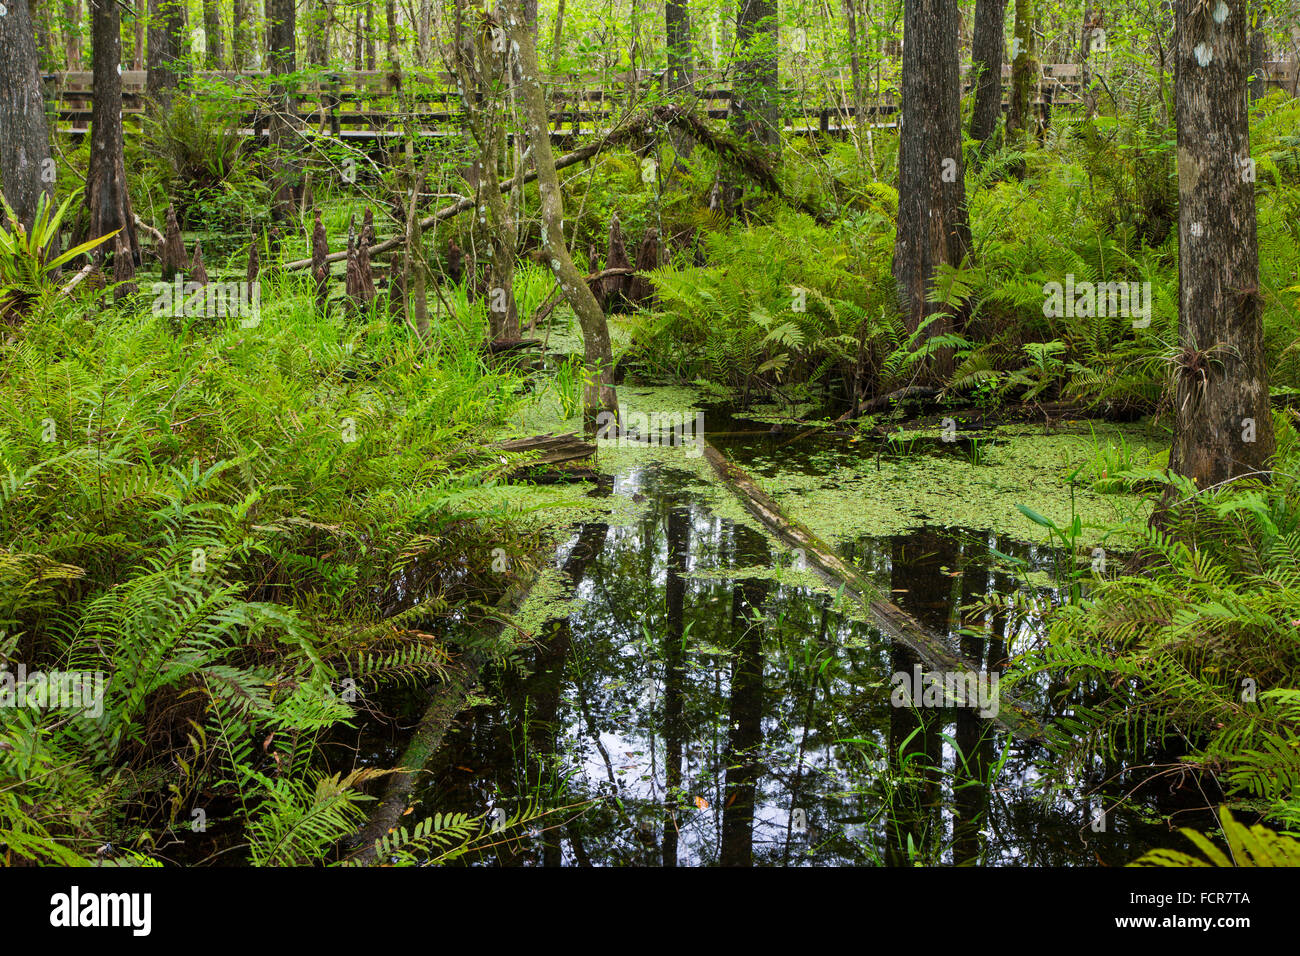 Cypress trees in swamp in Six Mile Cypress Slough Preserve in Fort Myers Florida Stock Photo